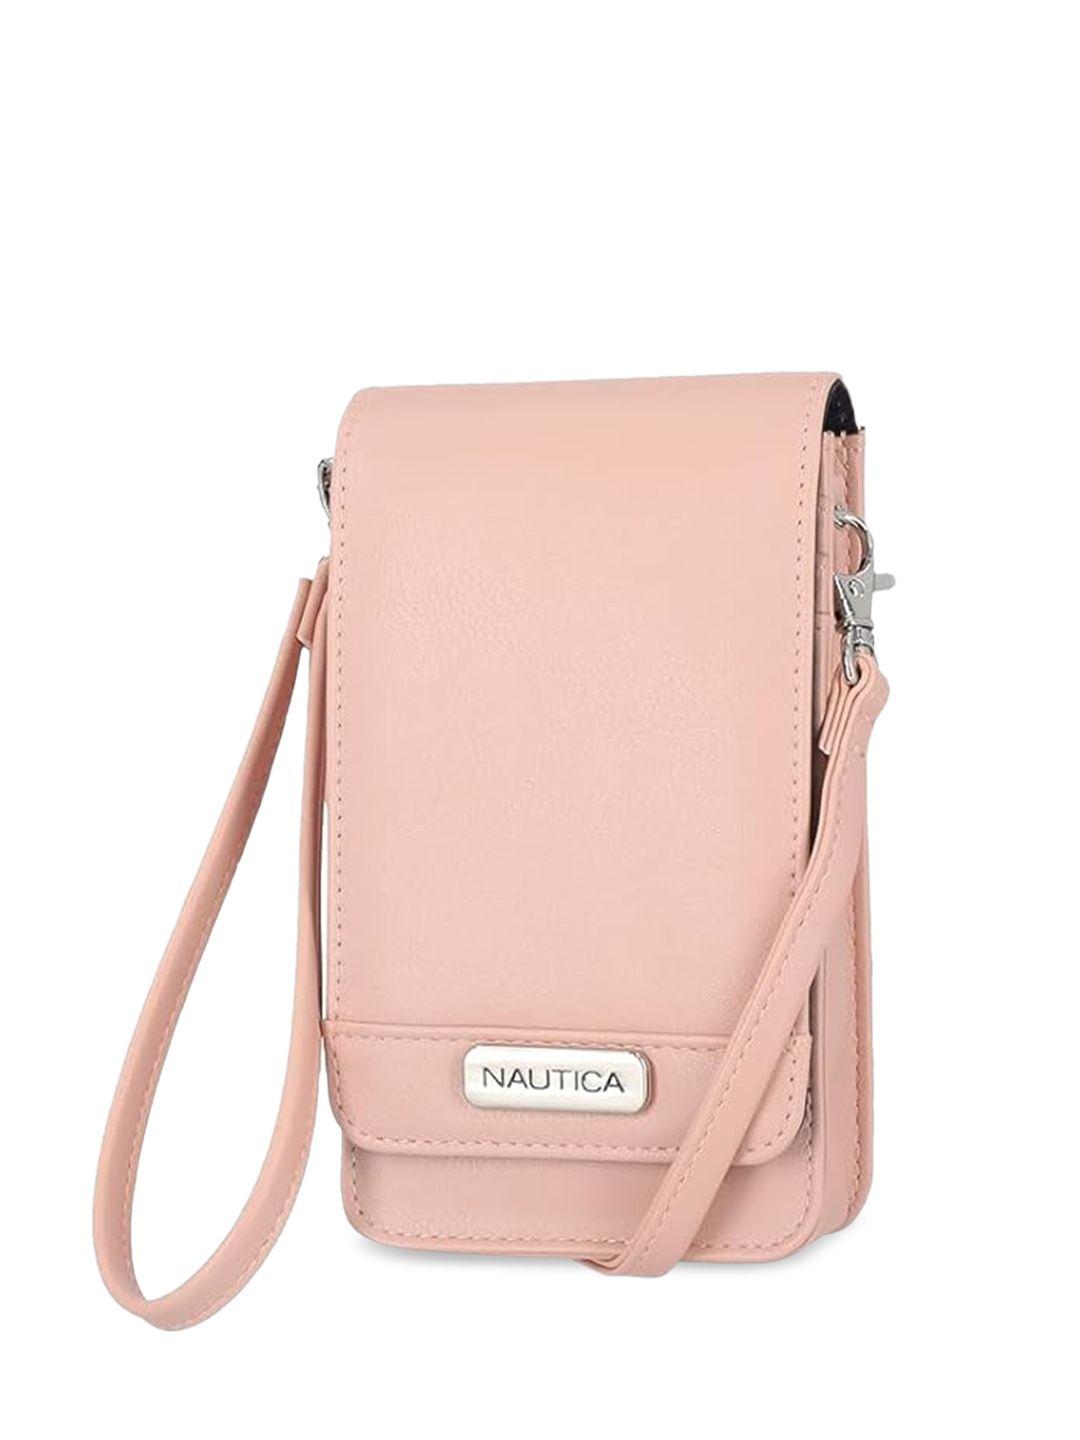 nautica pu structured sling bag with quilted